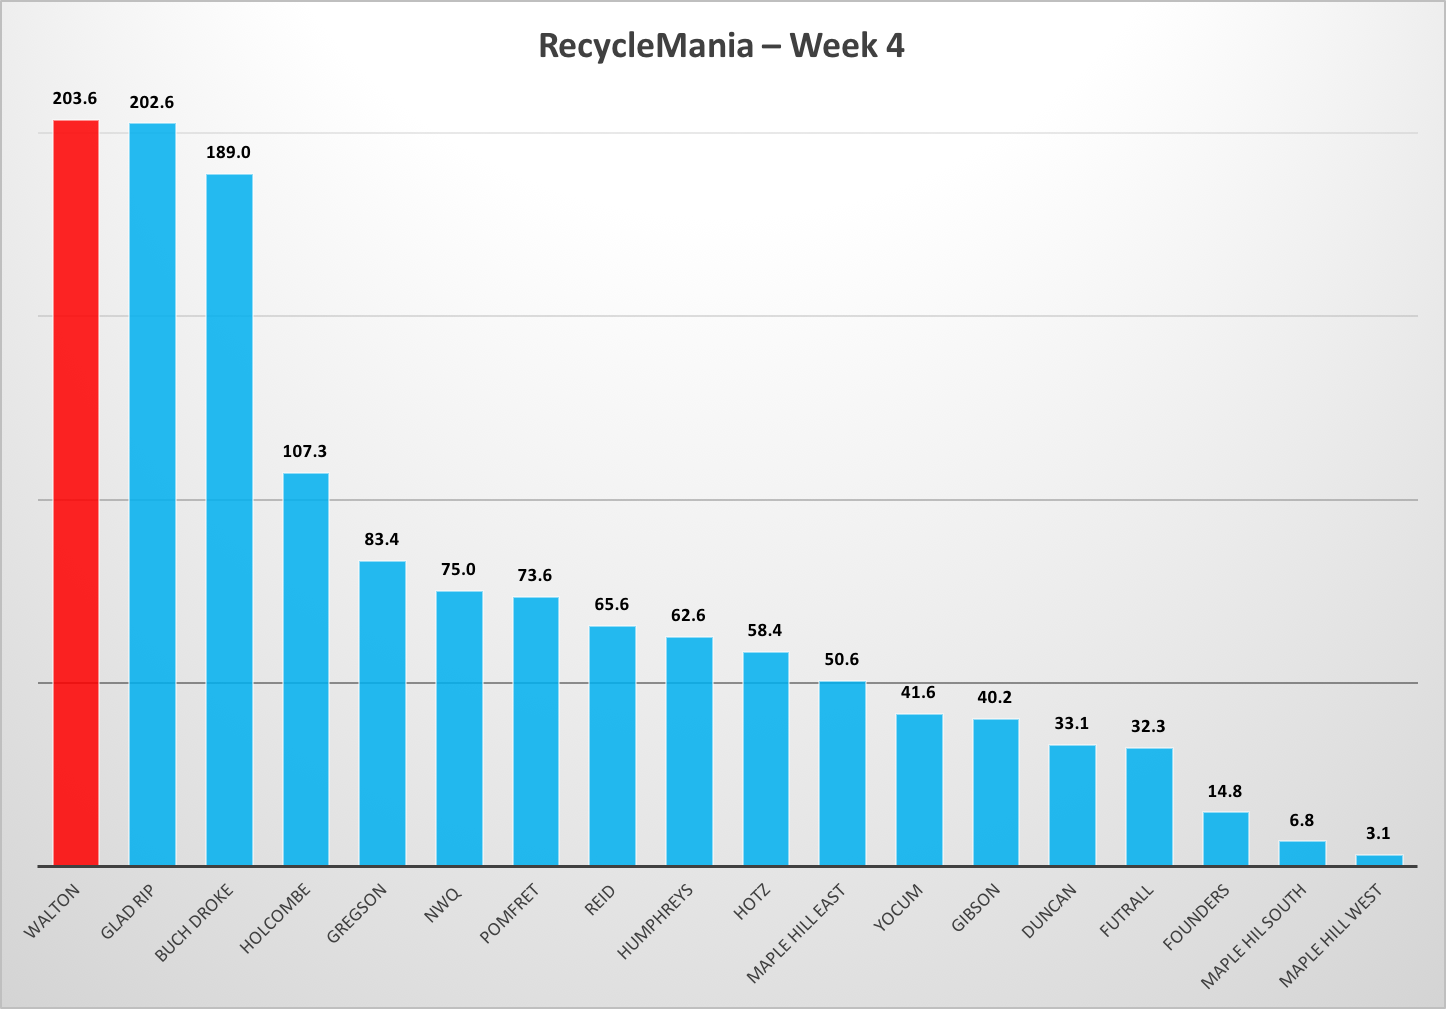 Walton Edges Out Gladson-Ripley for No. 1 | RecycleMania Week 4